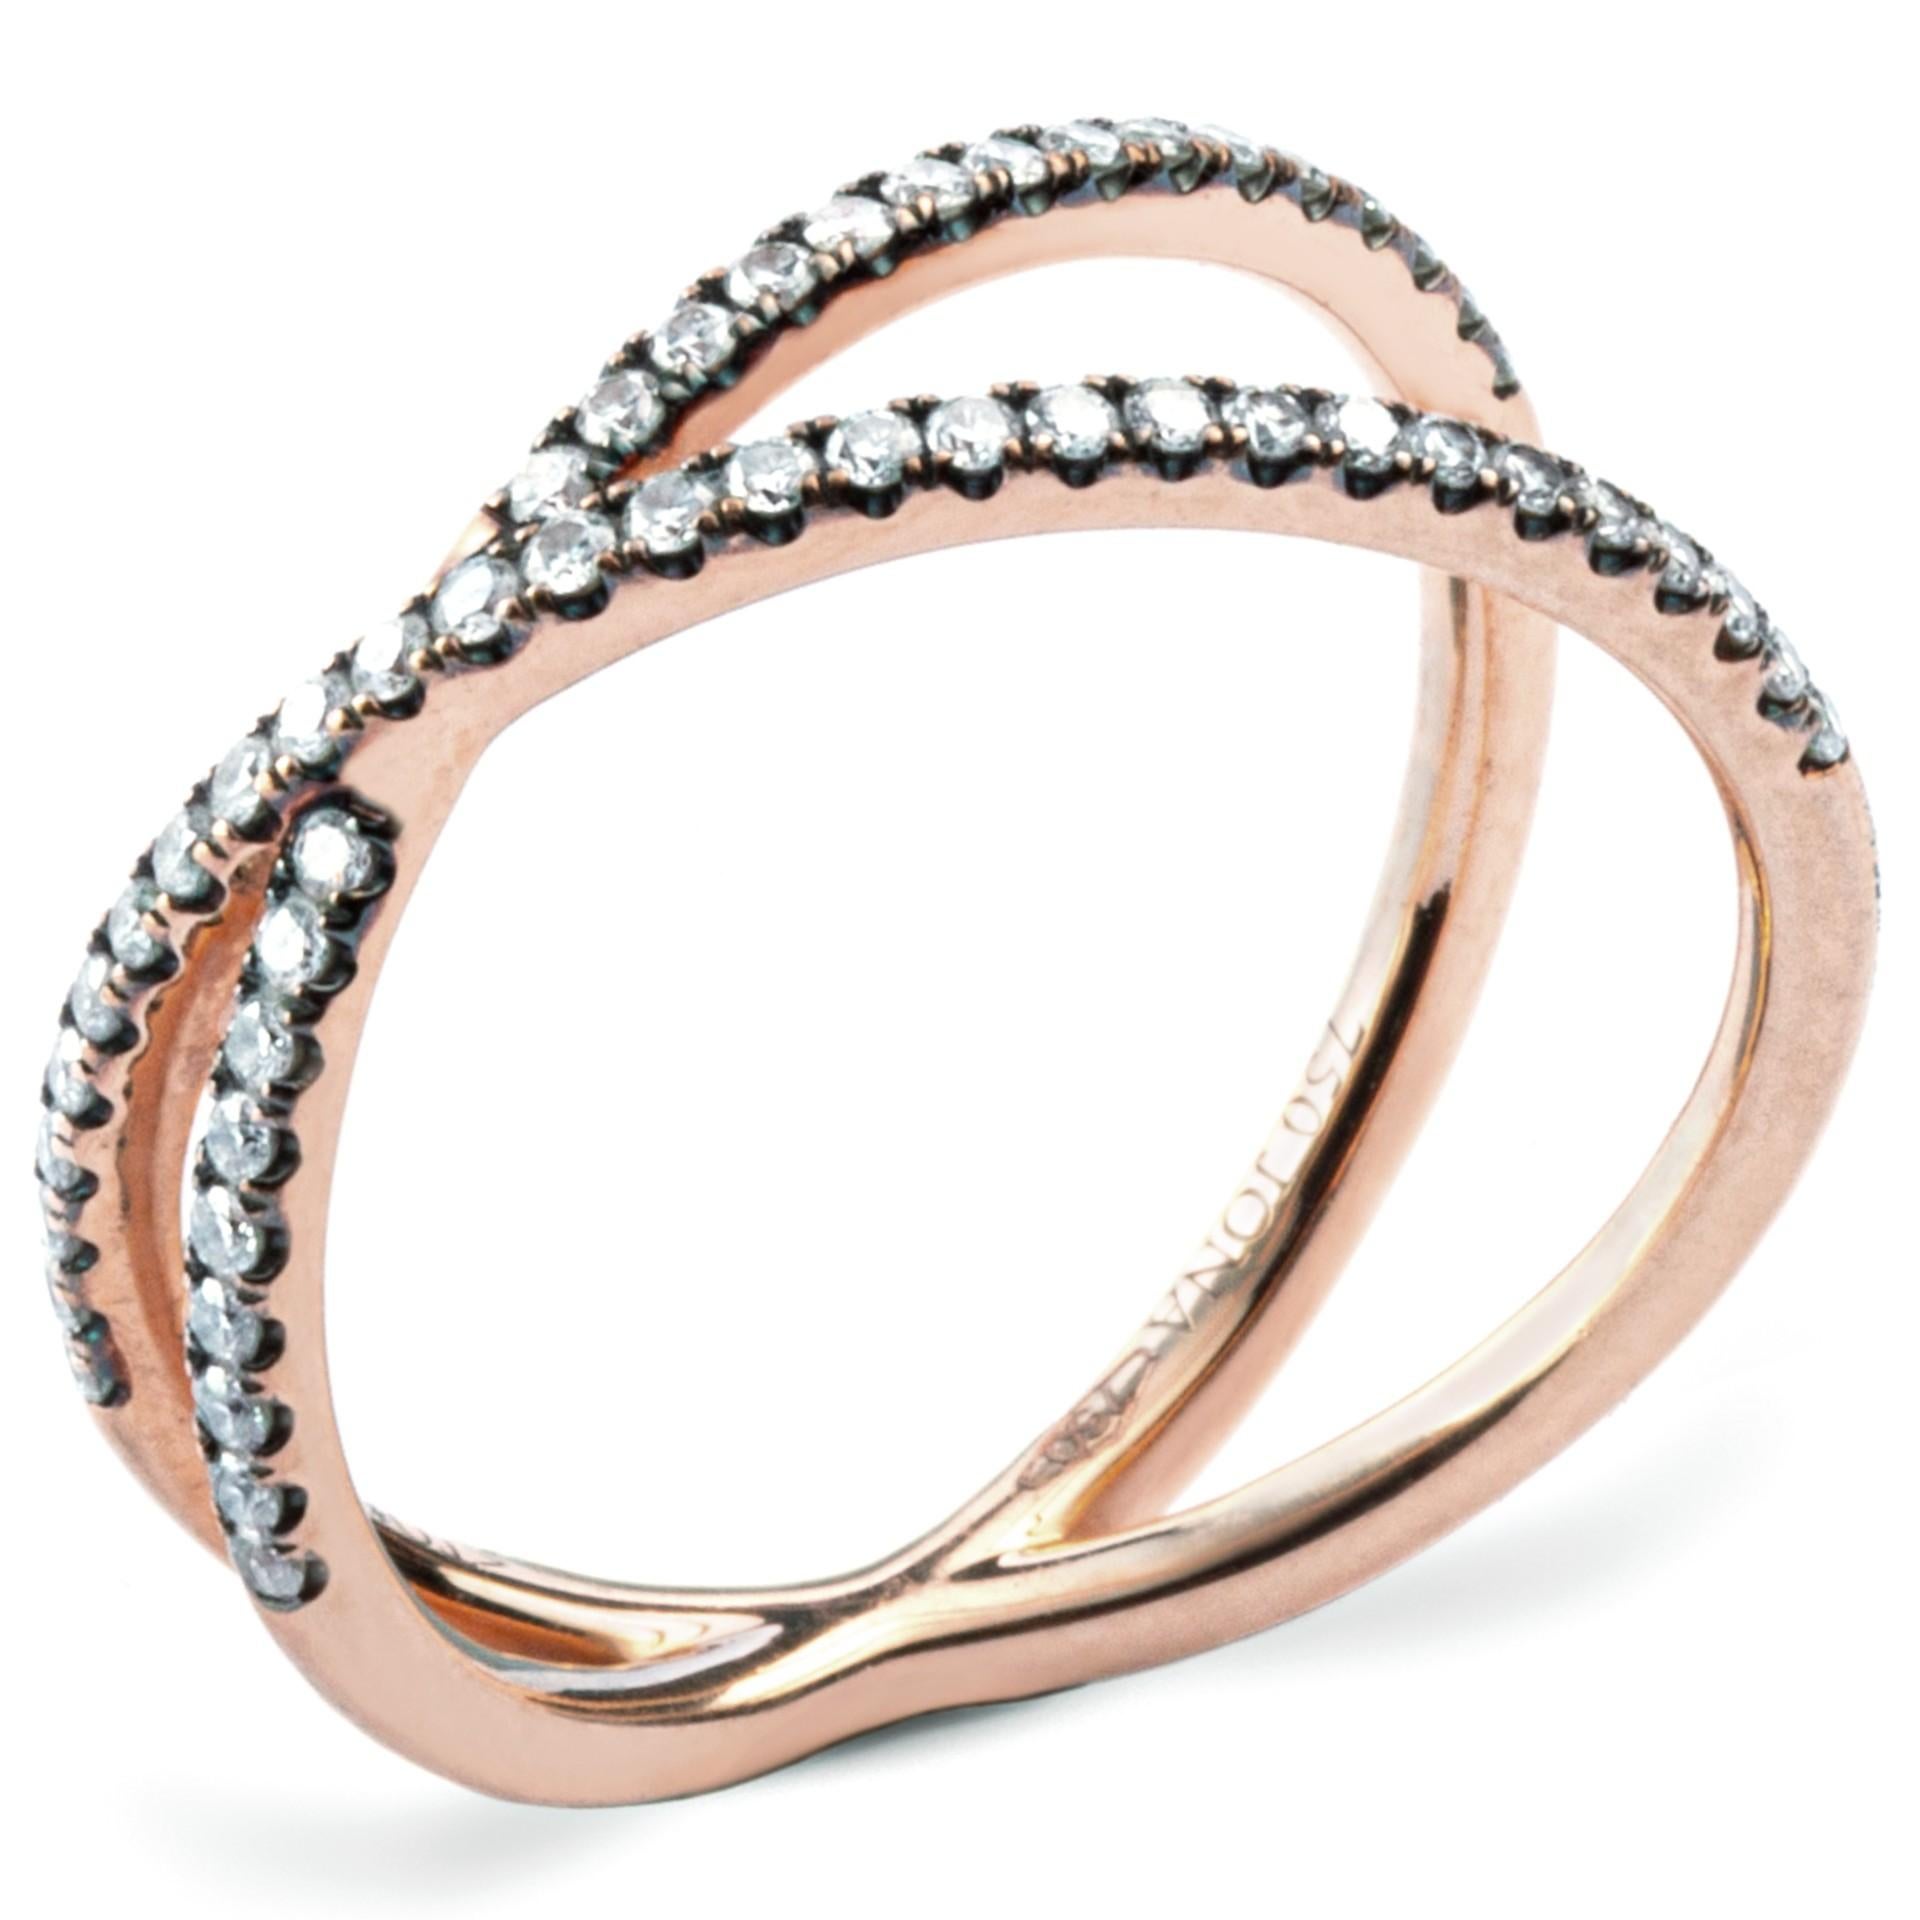 Alex Jona design collection, hand crafted in Italy, 18 karat rose gold Twiggy diamond ring, featuring 0.24 carats of white diamonds with black rhodium setting.
Size US 6 , can be sized to any specification.

Alex Jona jewels stand out, not only for